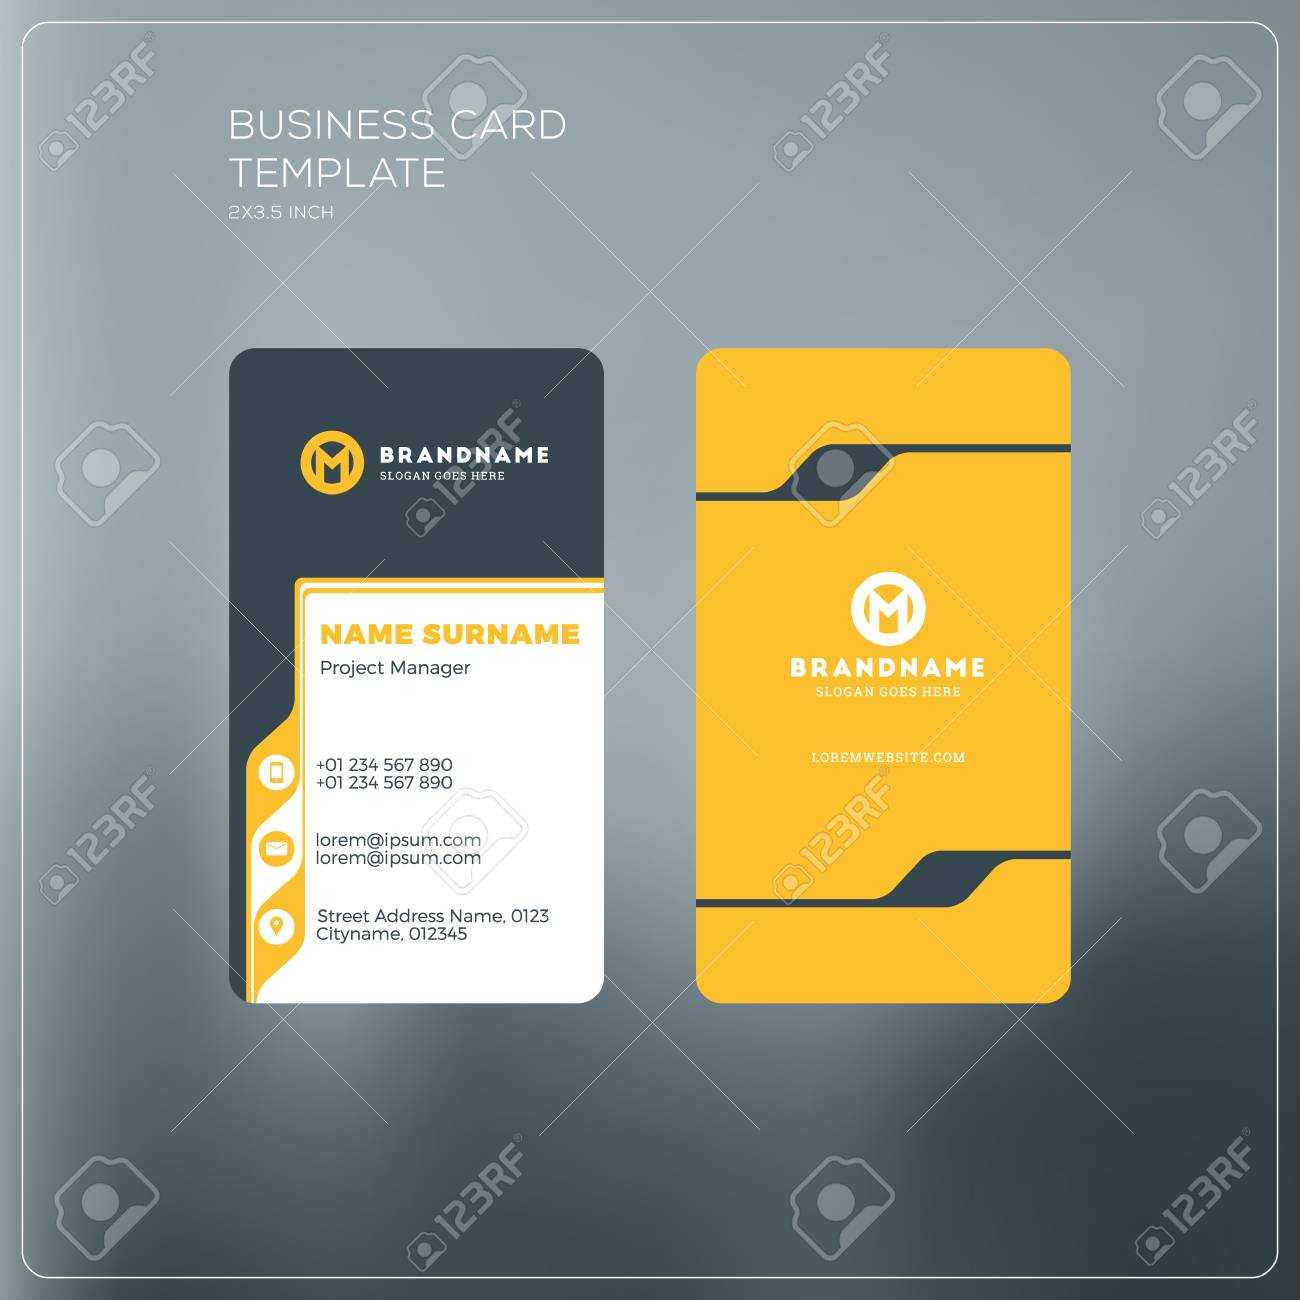 Personal Business Cards Template Intended For Pages Business Card Template